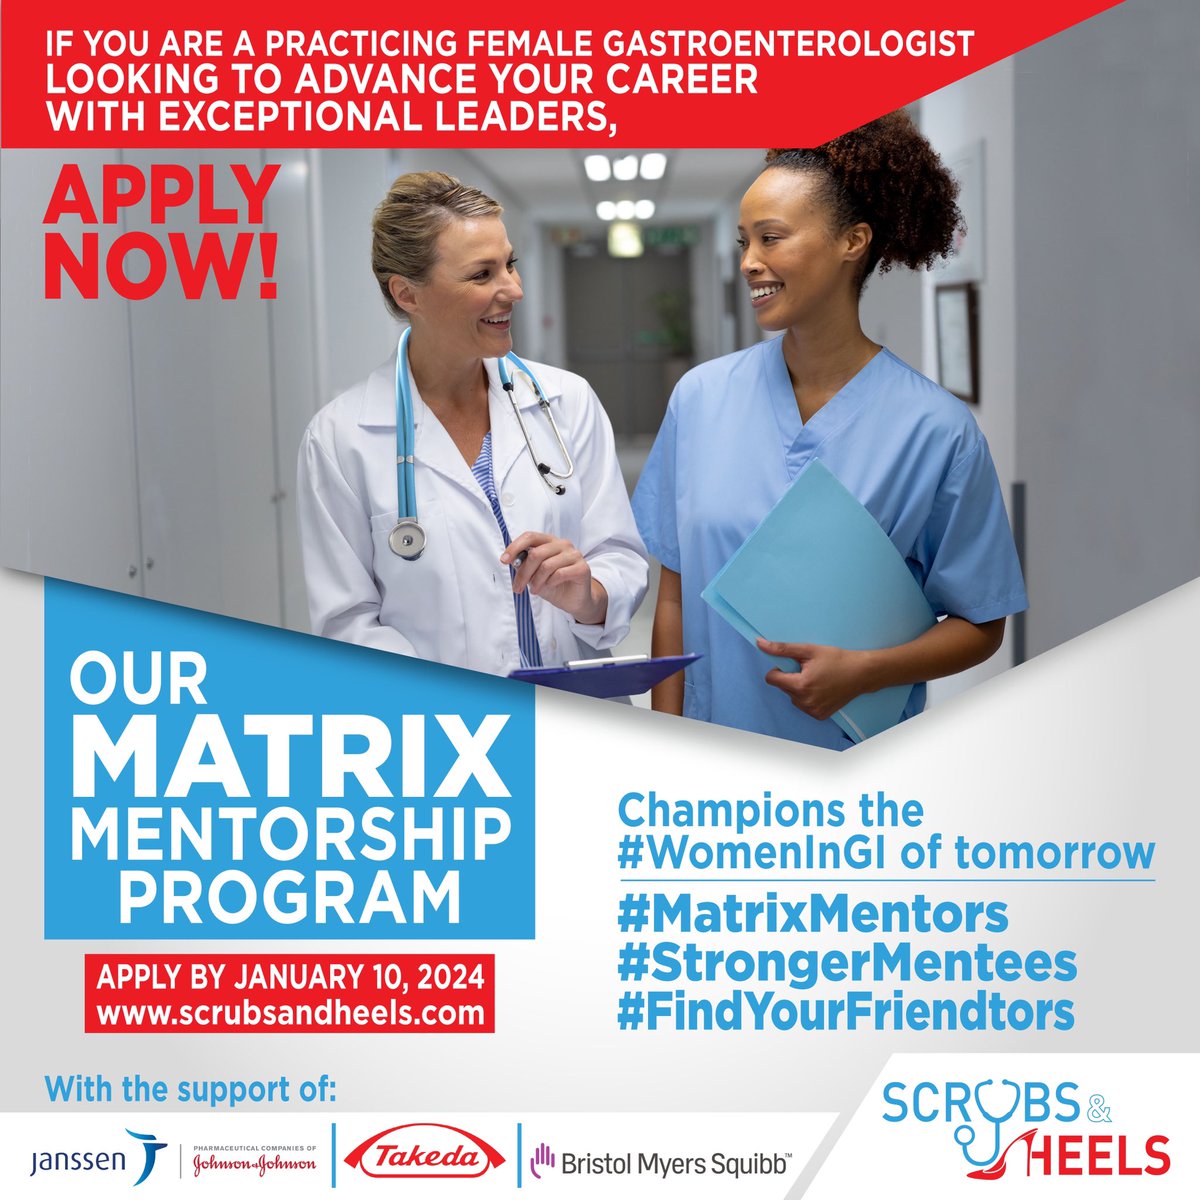 📣#WomenInGI 🩺 Ready to take your GI career to the next level ? 🤝Want to engage w #Friendtors excited to be part of your personal growth? #ScrubsNHeels #MatrixMentorship is for you! ✅Mentor/Sponsorship ✅Coaching ✅Peer allyship Apply now ! Scrubsandheels.com